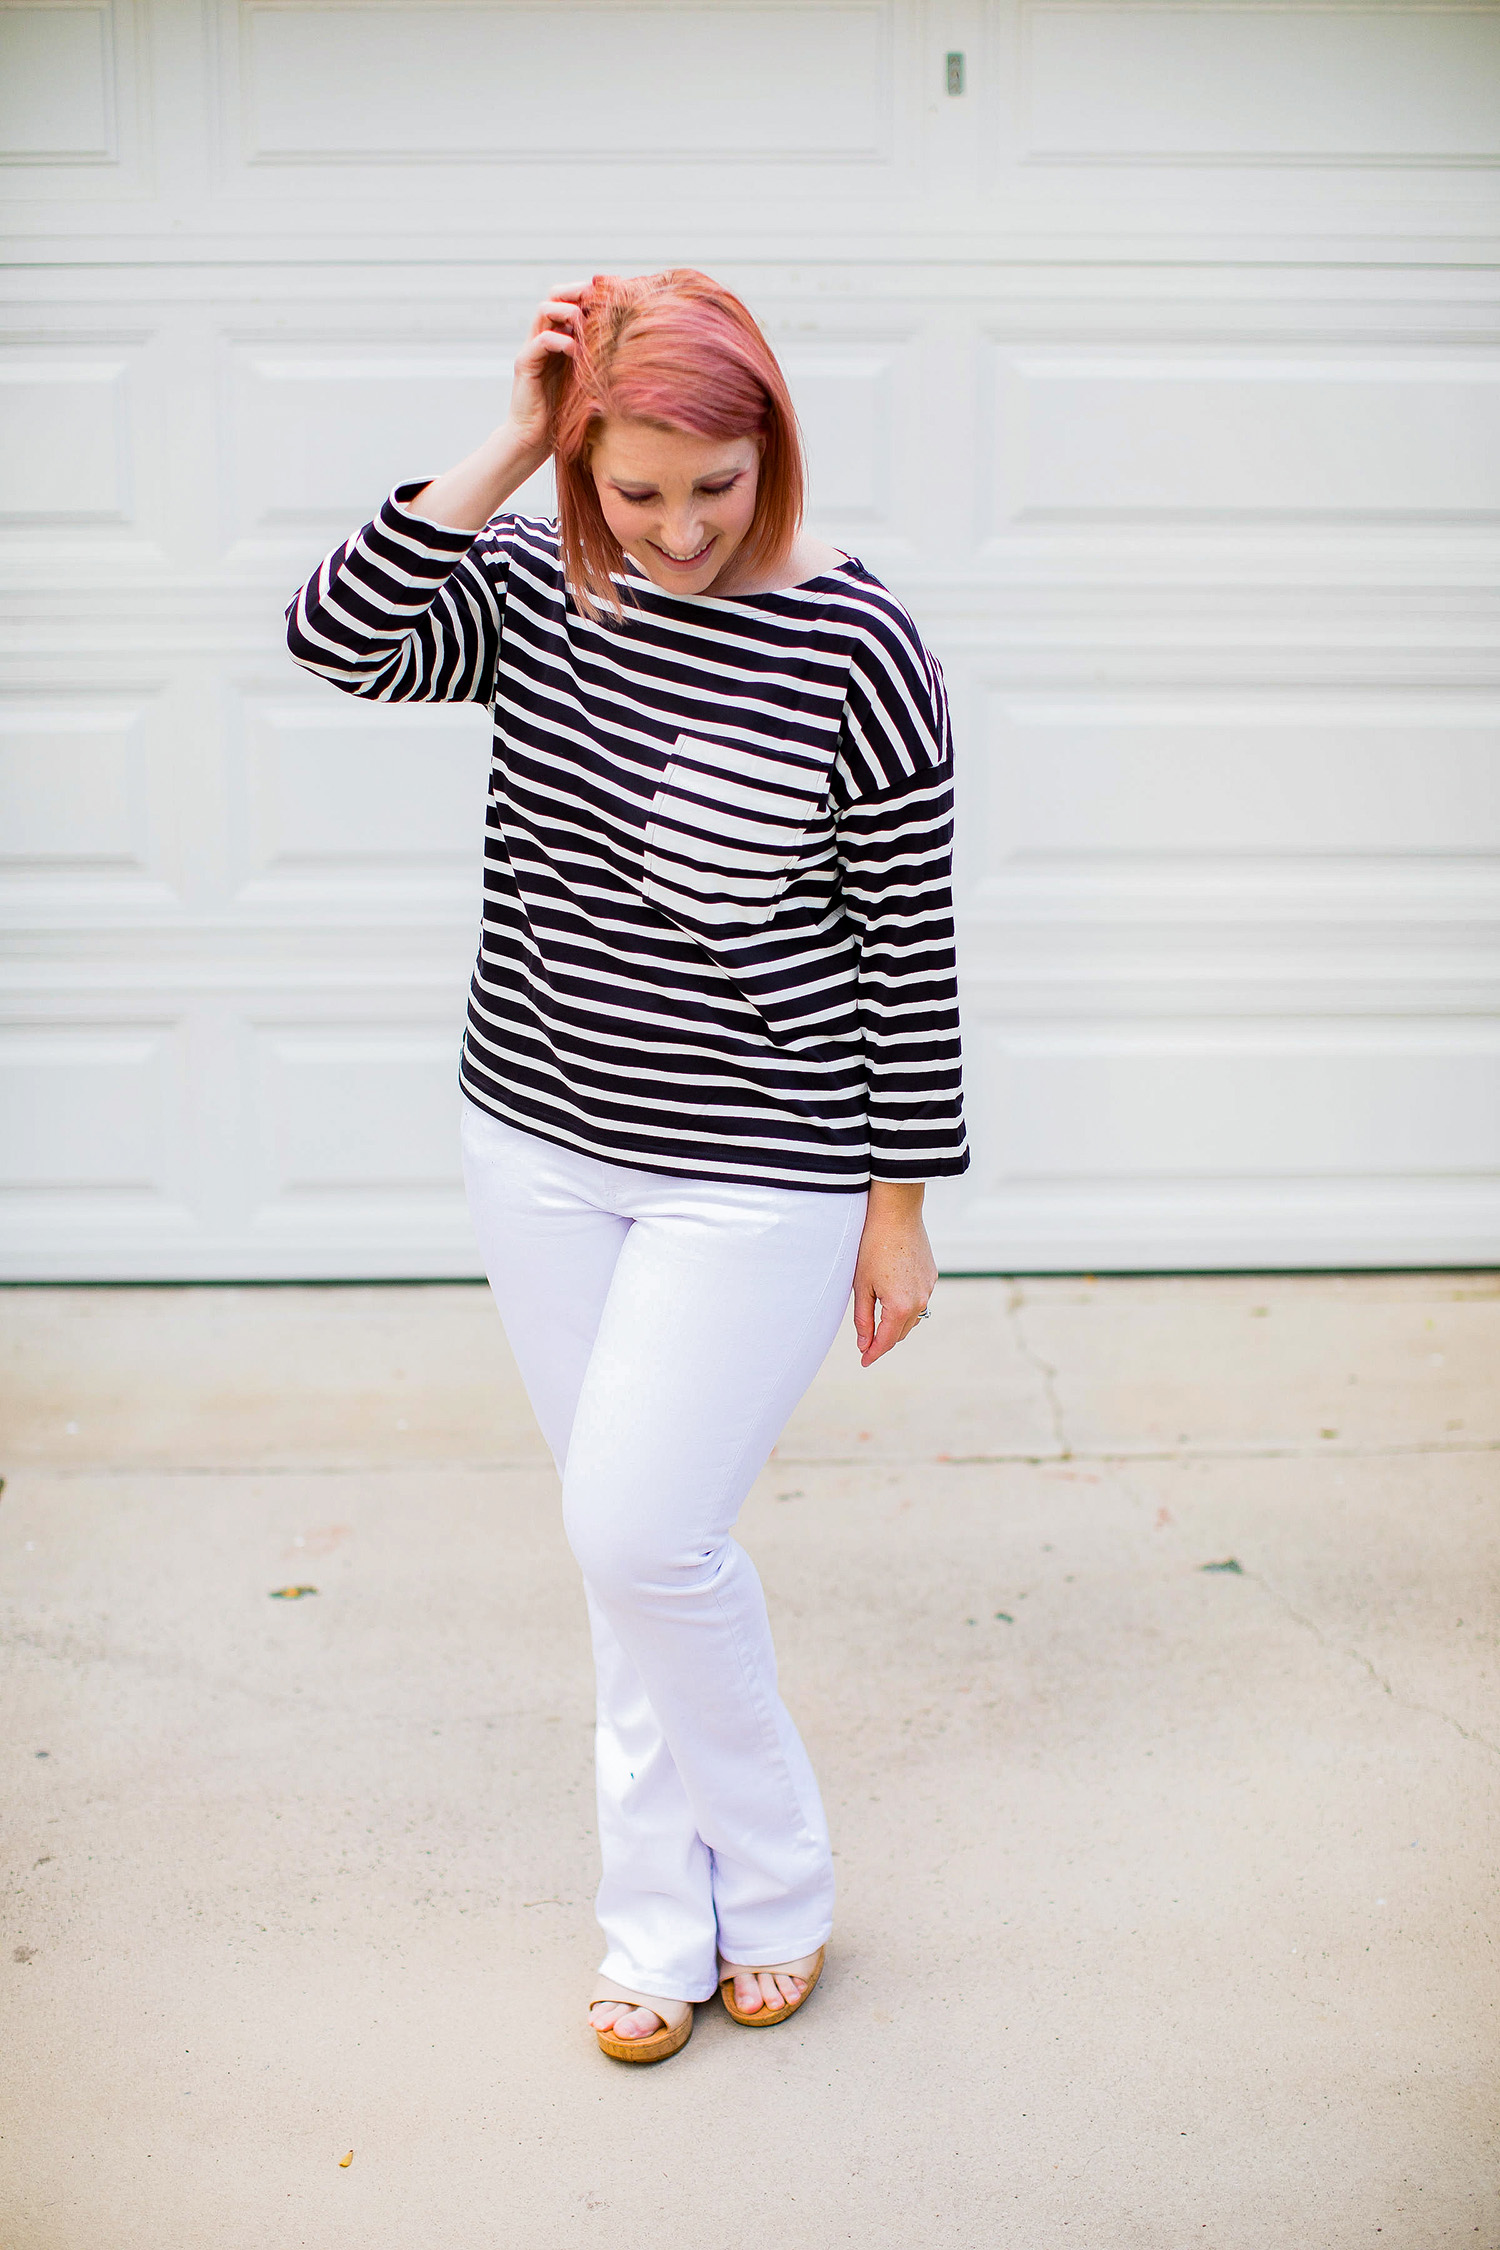 Looking for a great striped tee? This Kate Spade Stripe Contrast Pocket Tee is the perfect basic spring tee.  // Stitch Fix Review April 2019